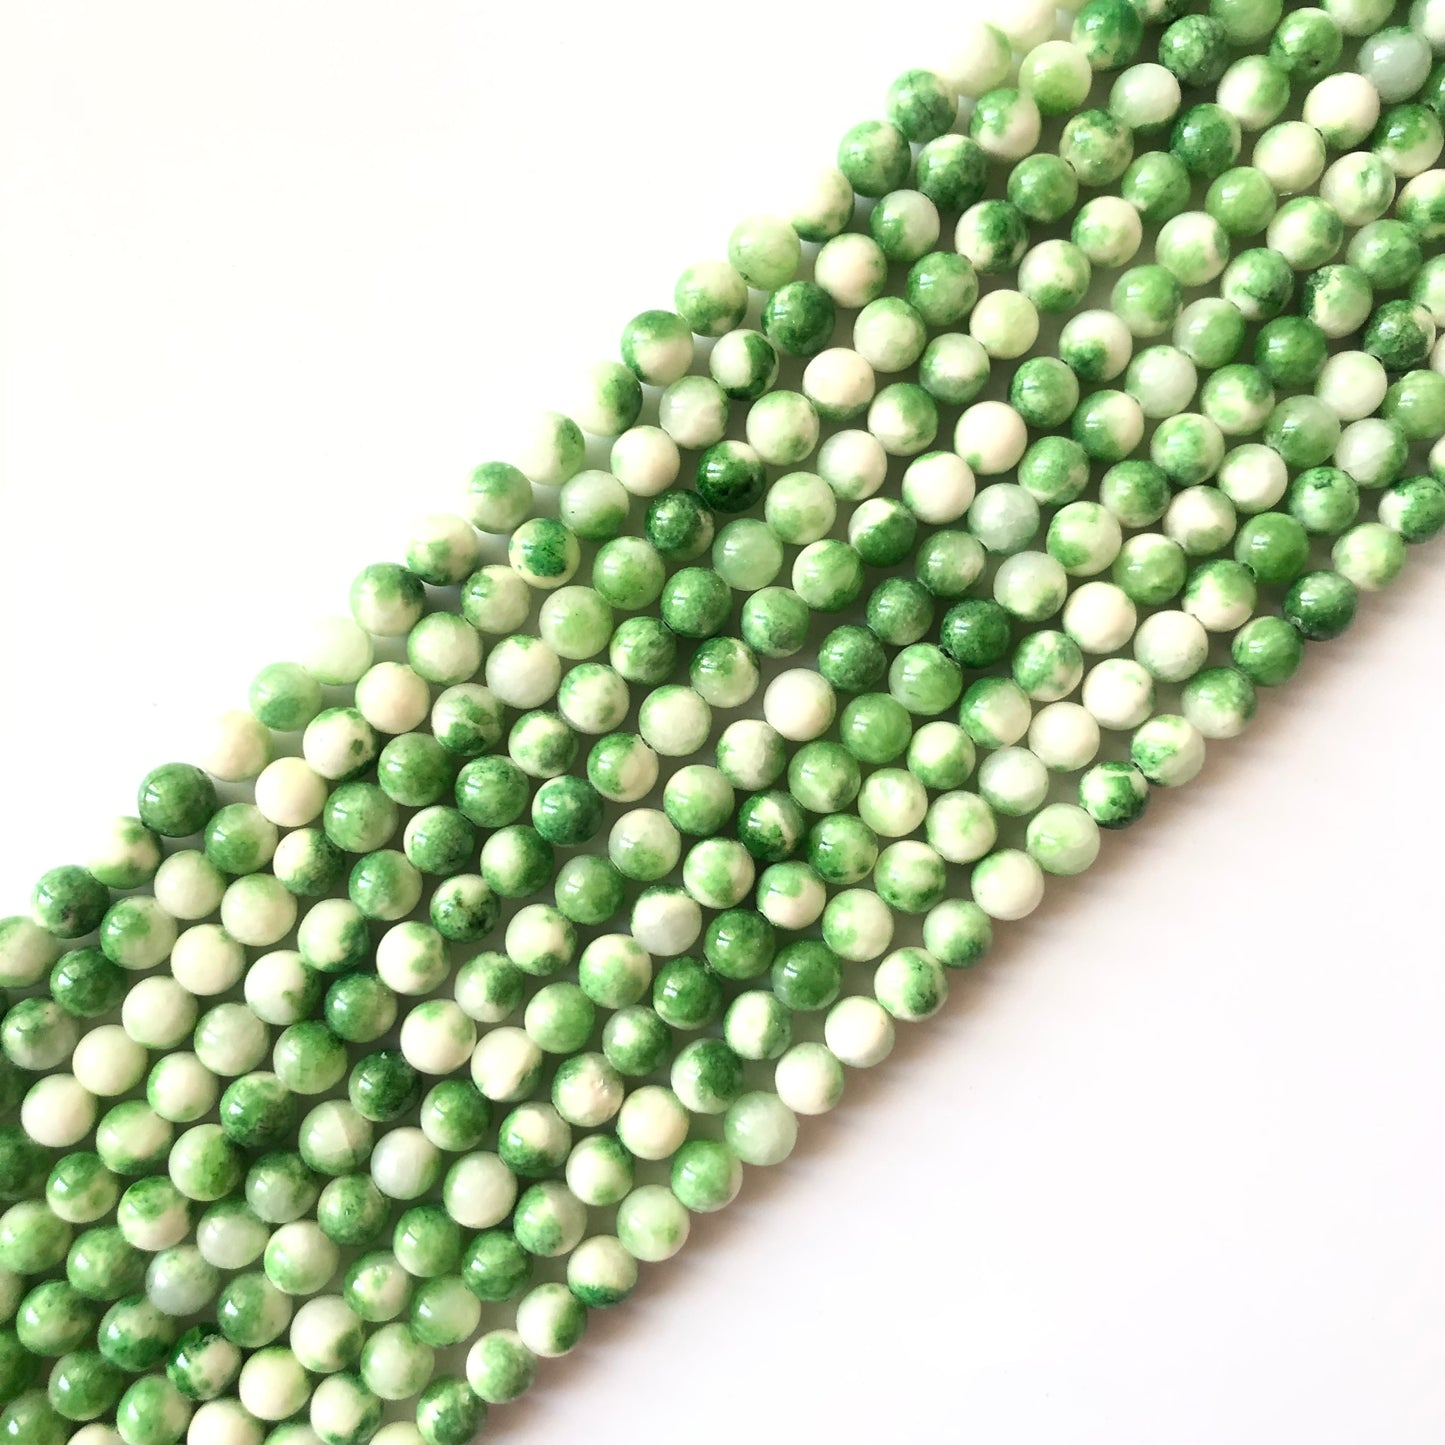 2 Strands/lot 8mm, 10mm Natural White Green Persian Jade Round Stone Beads Stone Beads 8mm Stone Beads Persian Jade Beads Round Jade Beads Charms Beads Beyond